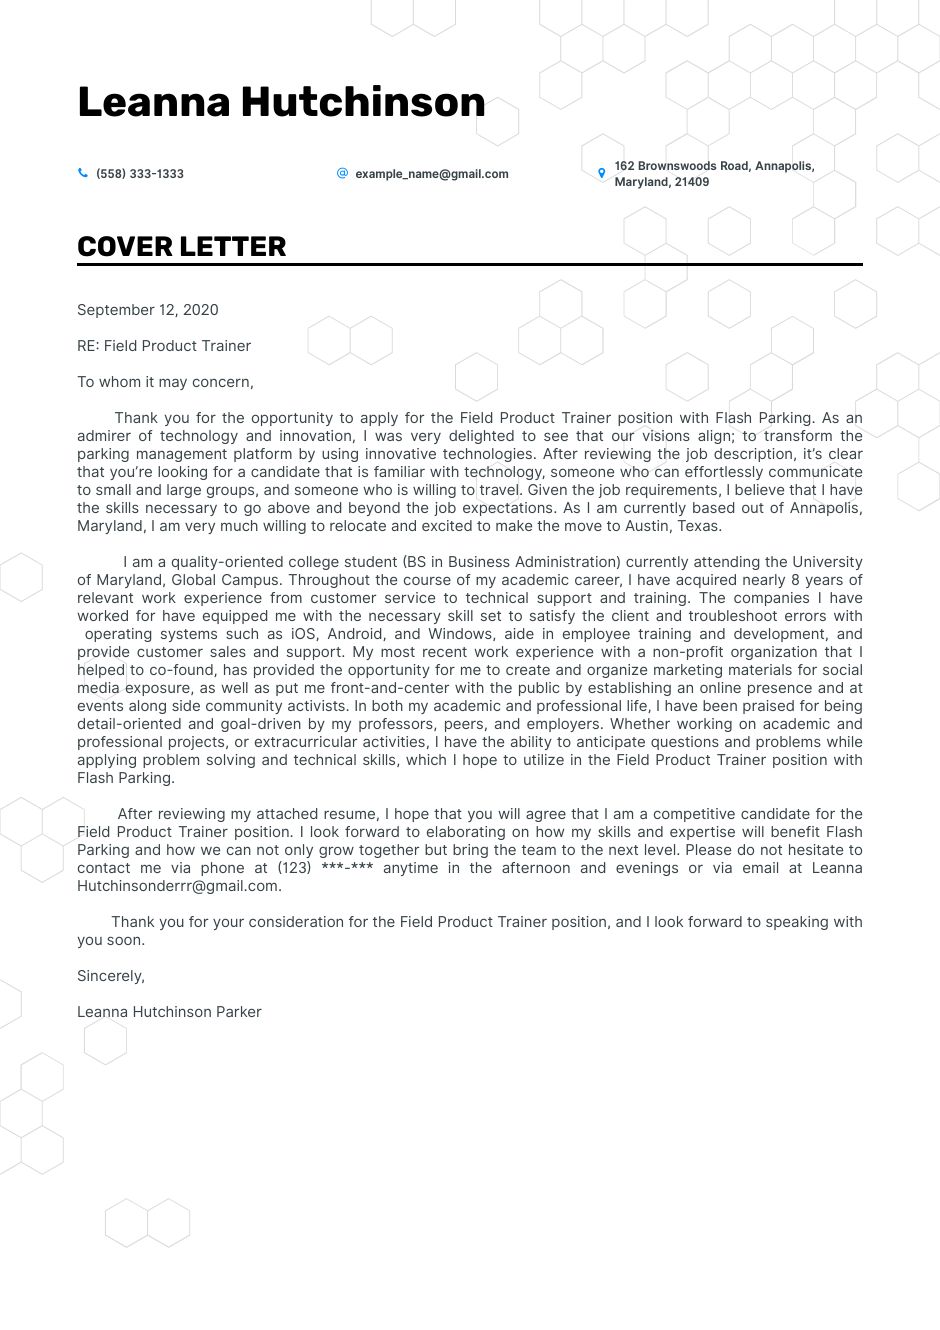 trainer-coverletter.png